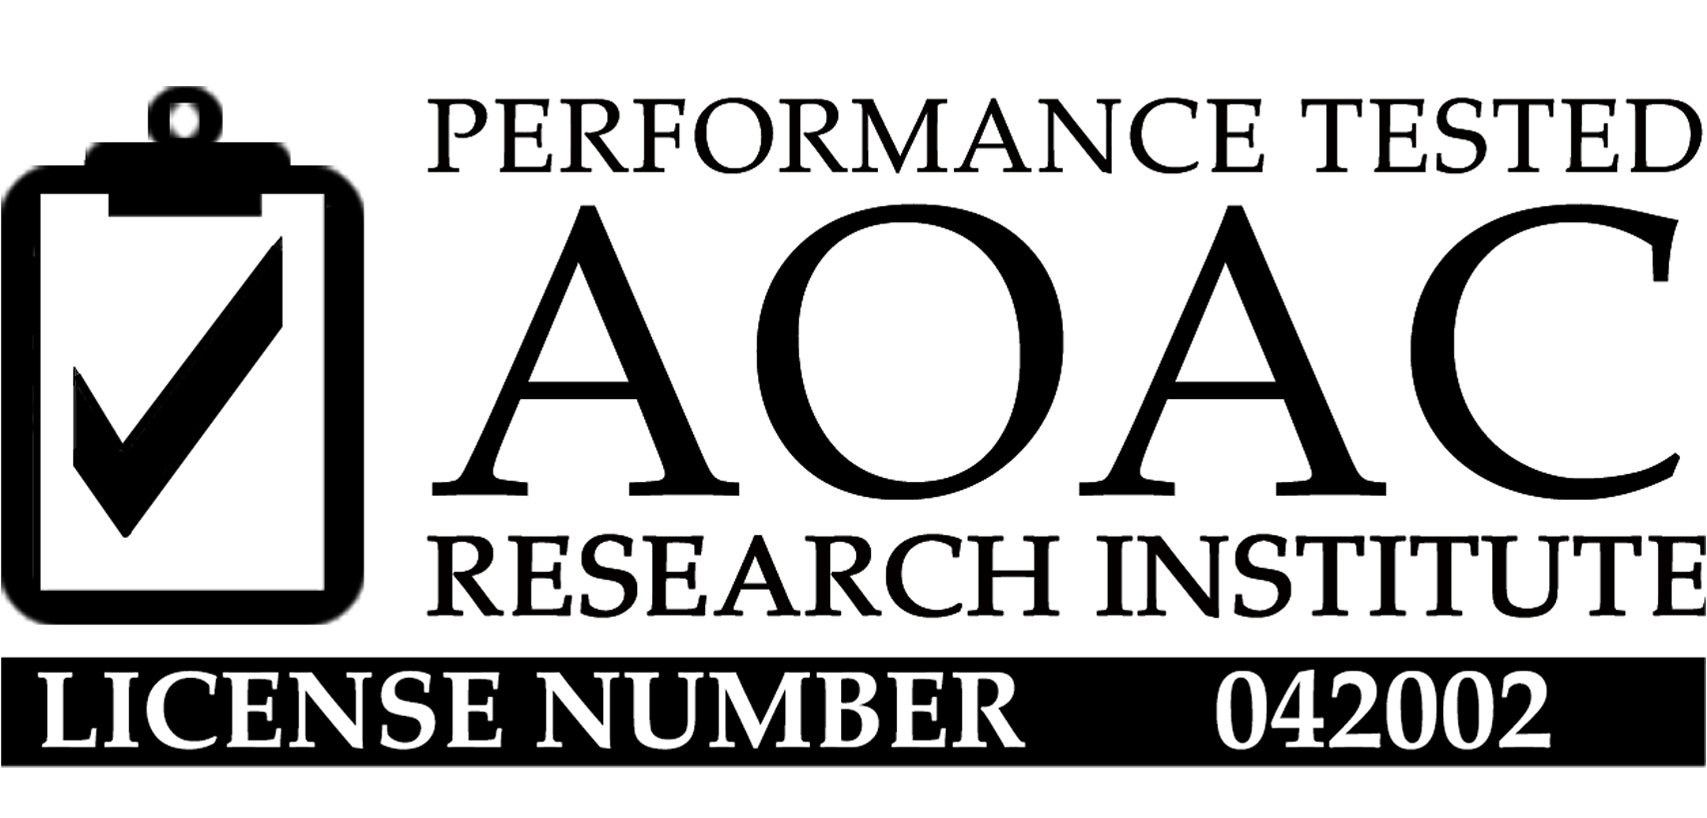 Performance Tested AOAC Research Institute, License Number 042002, Salmonella Assay